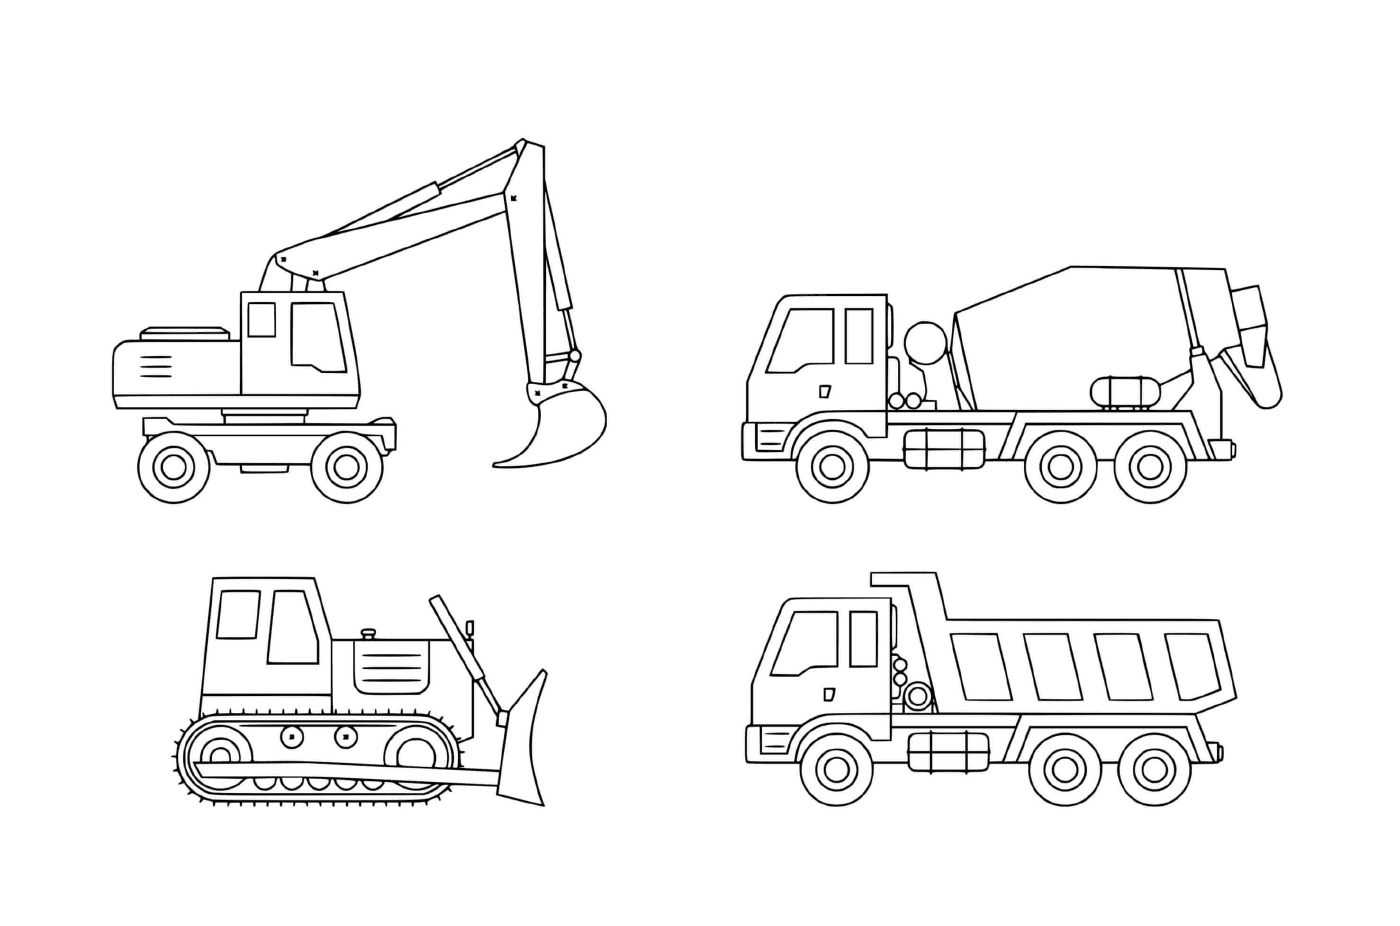  Different types of construction equipment 